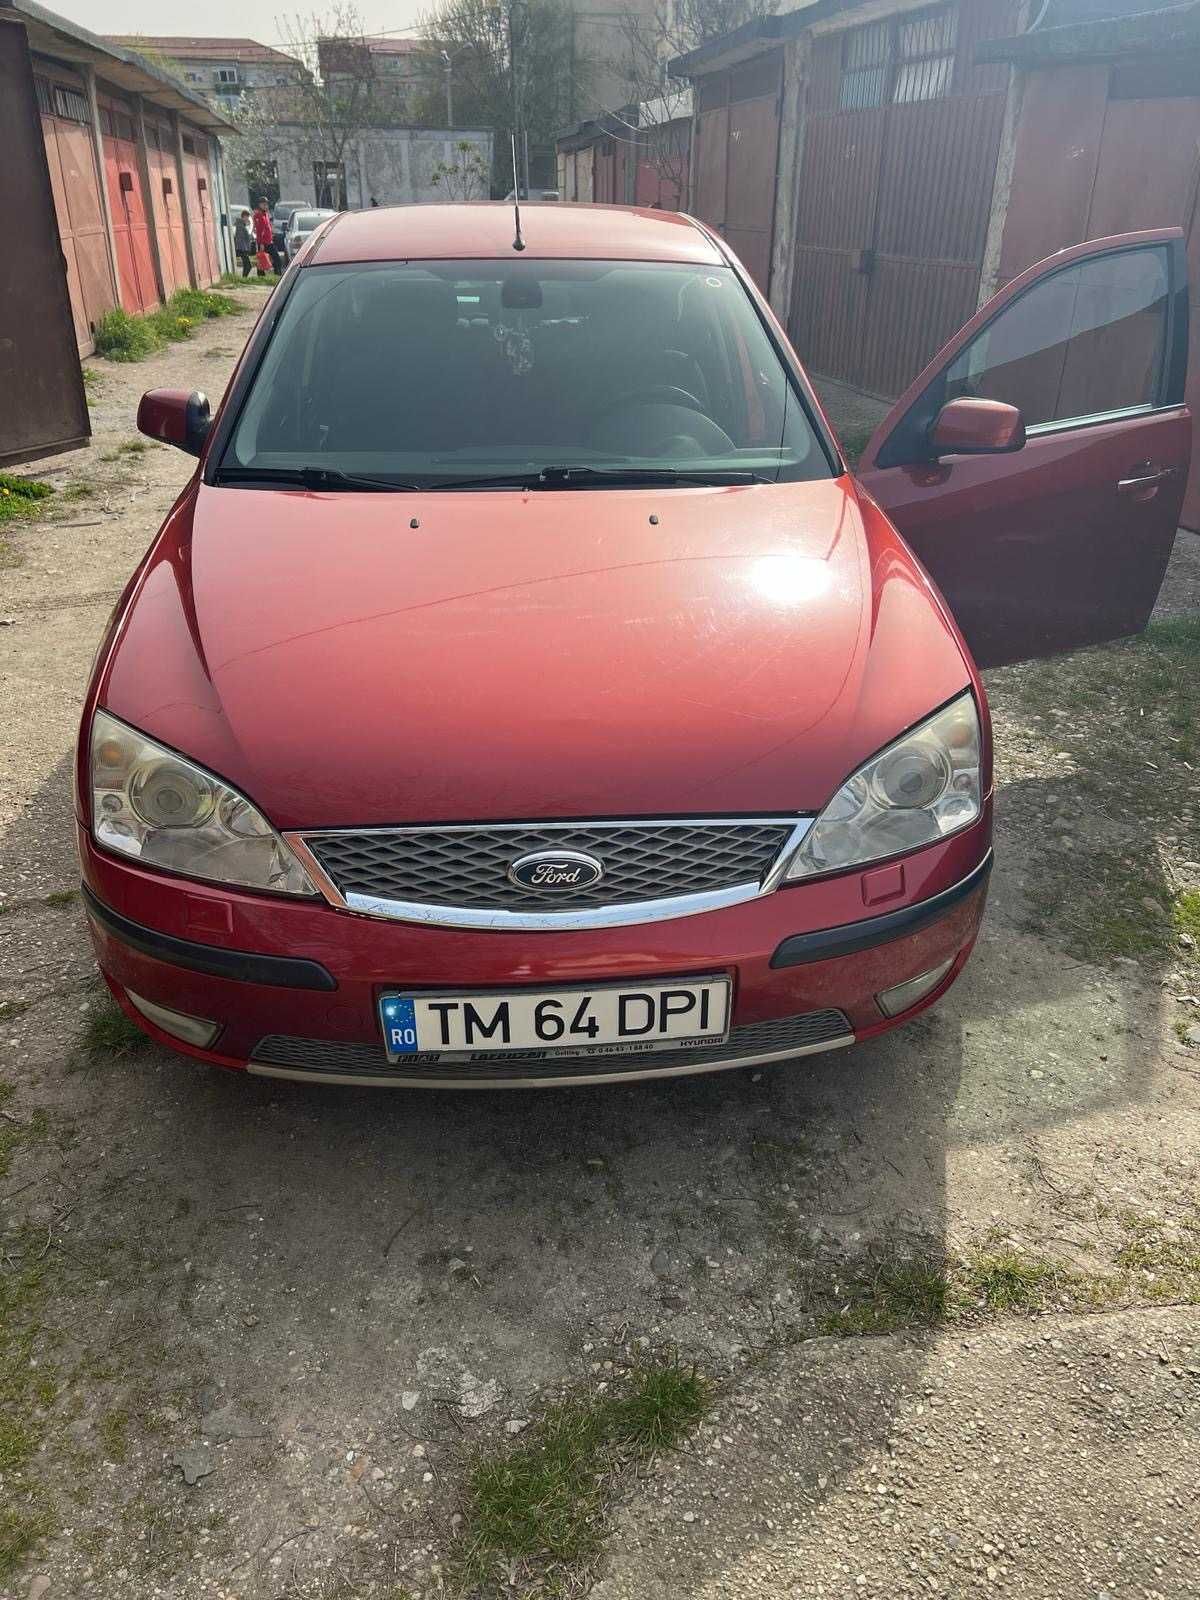 Vand Ford Mondeo 2.2 tdci an 2006